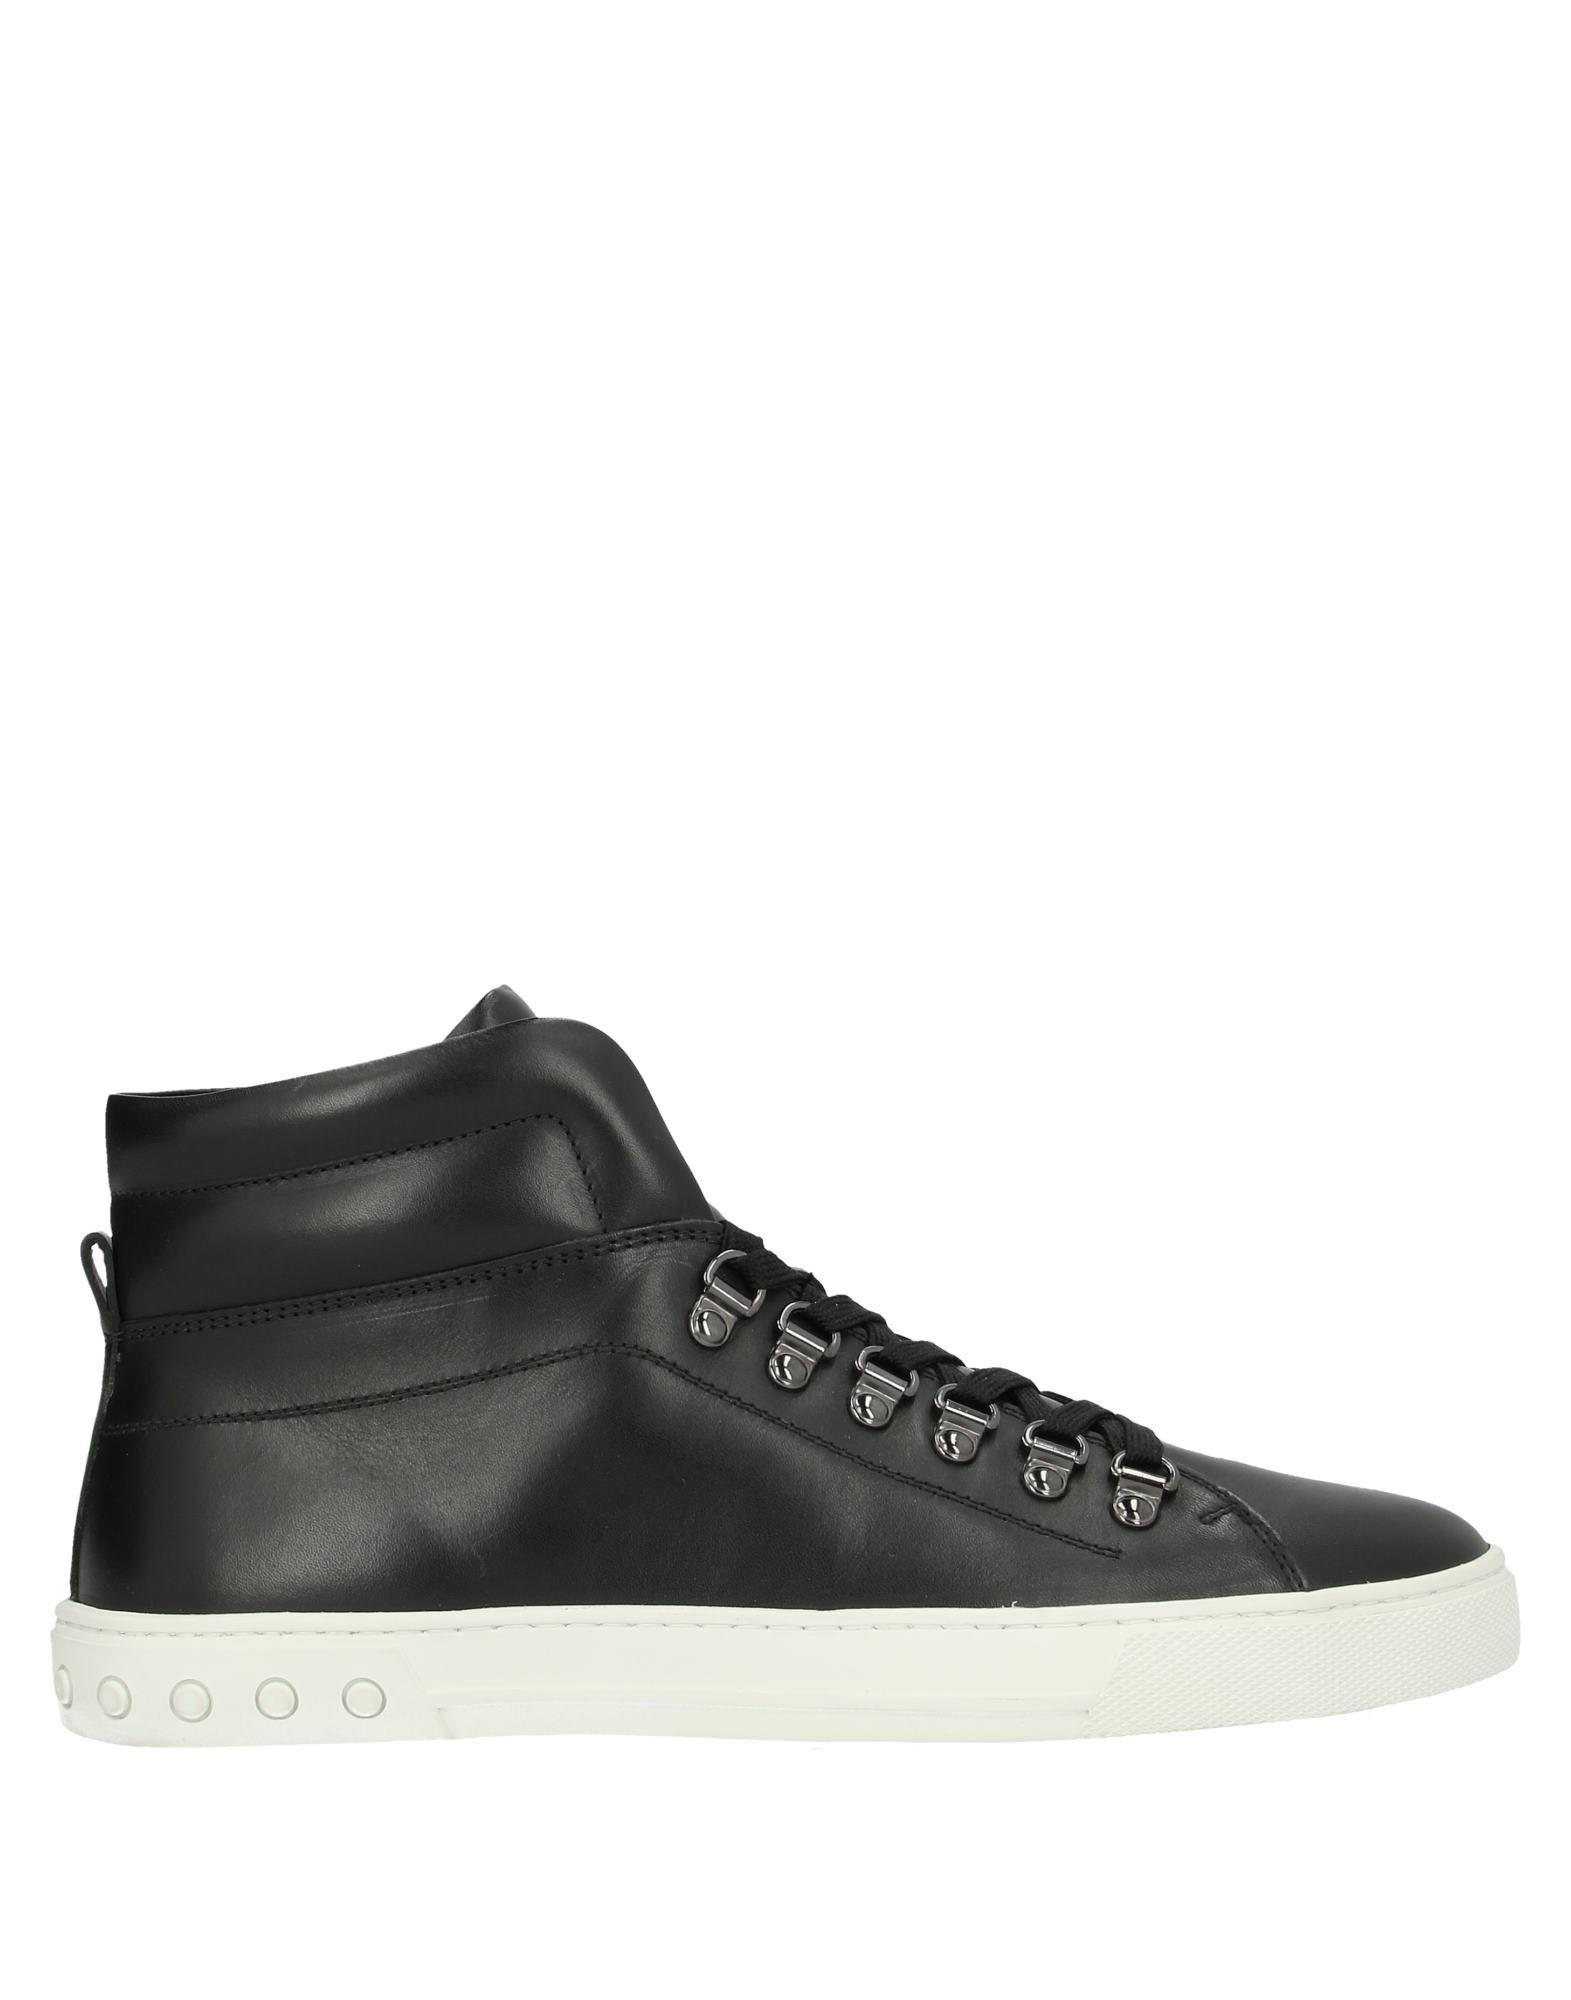 Tod's High-tops & Sneakers in Black for Men - Lyst